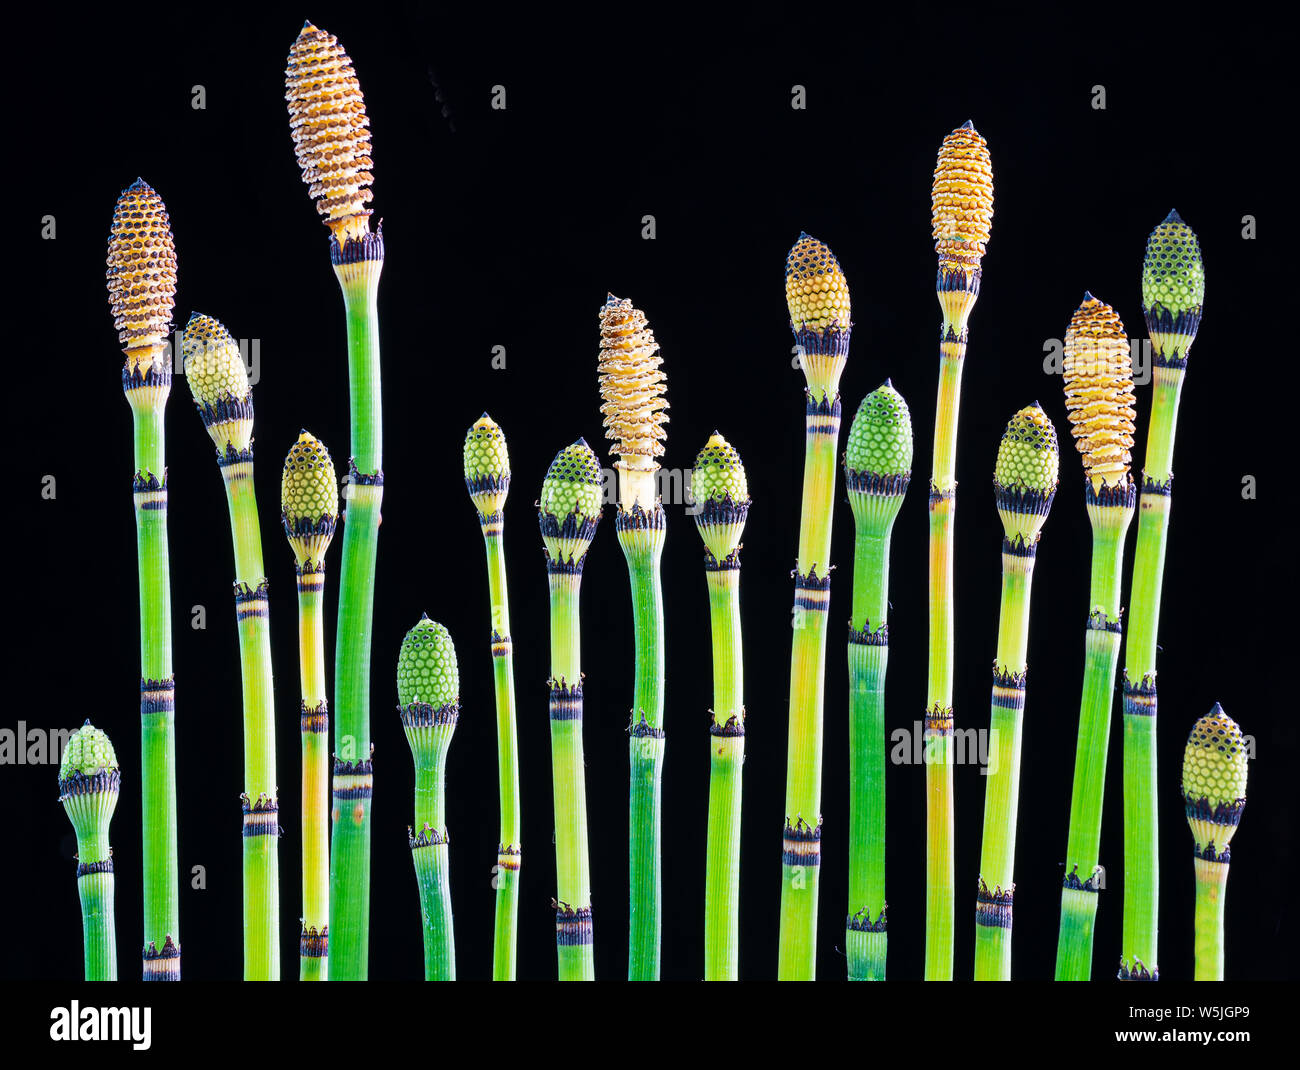 Shoots of horsetail (Equisetum hyemale) showing various stages of maturity. Mature heads release spores for reproduction. Stock Photo